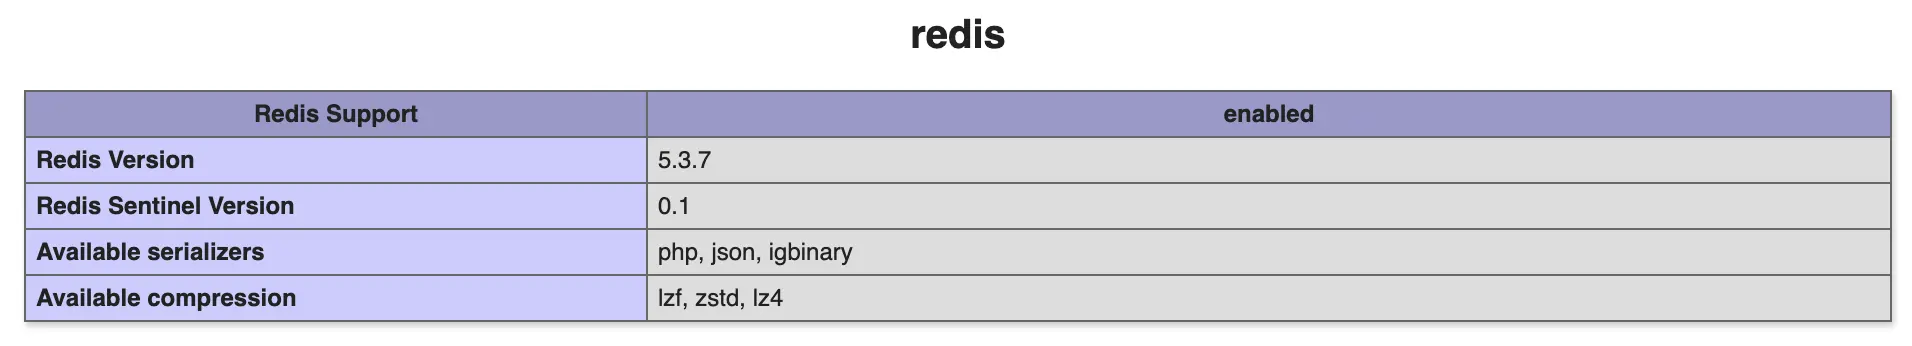 phpinfo showing the PHP engine with "redis" module enabled.